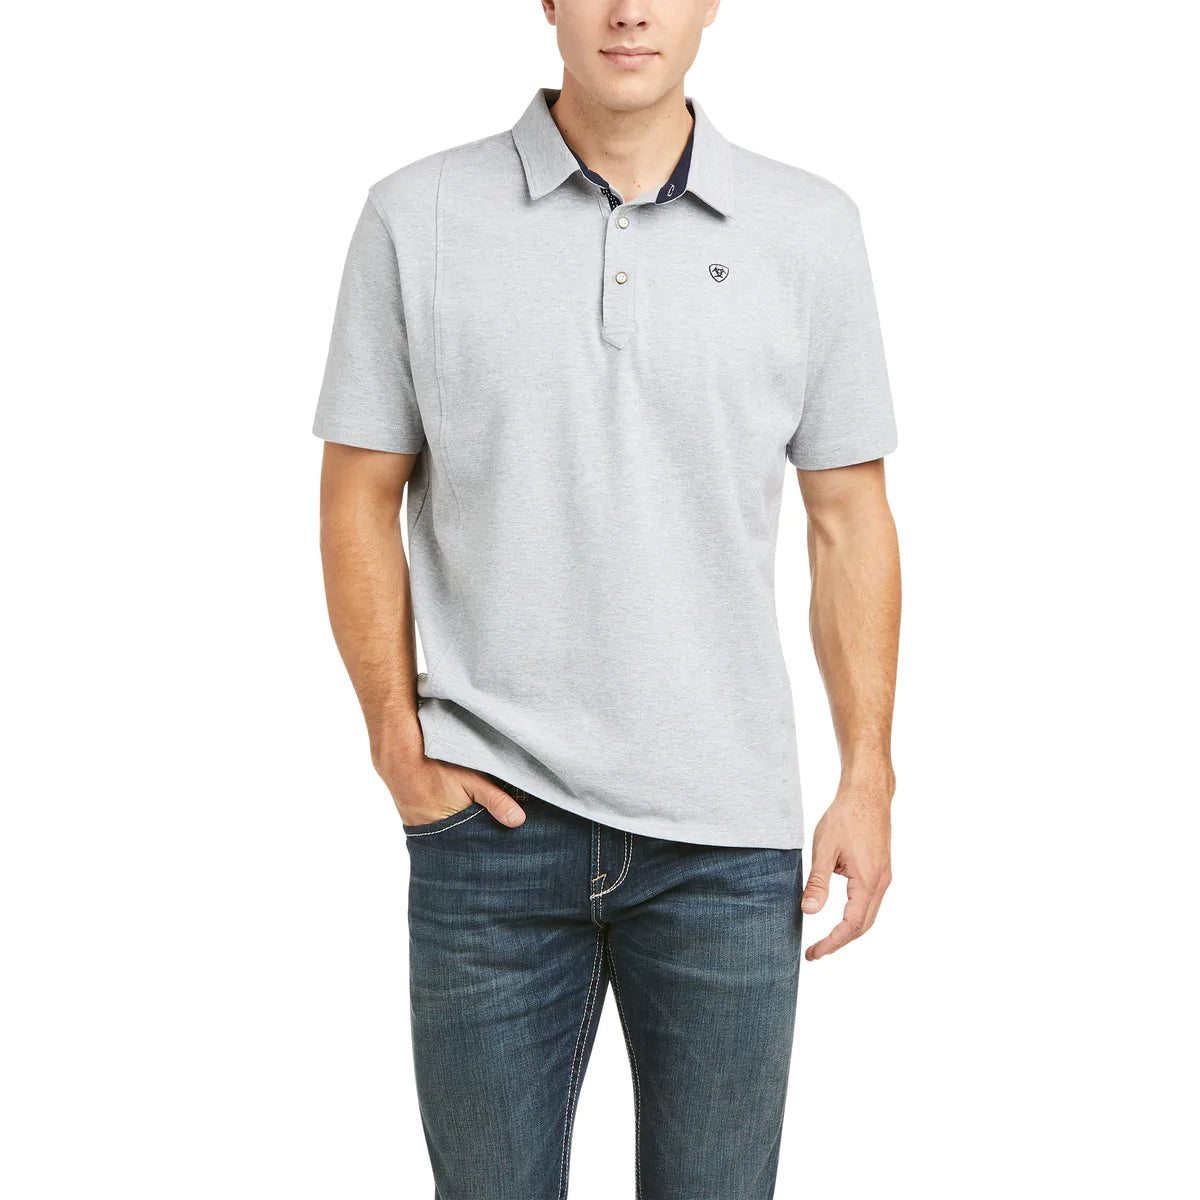 Ariat Mens Medal Polo - Heather Gray